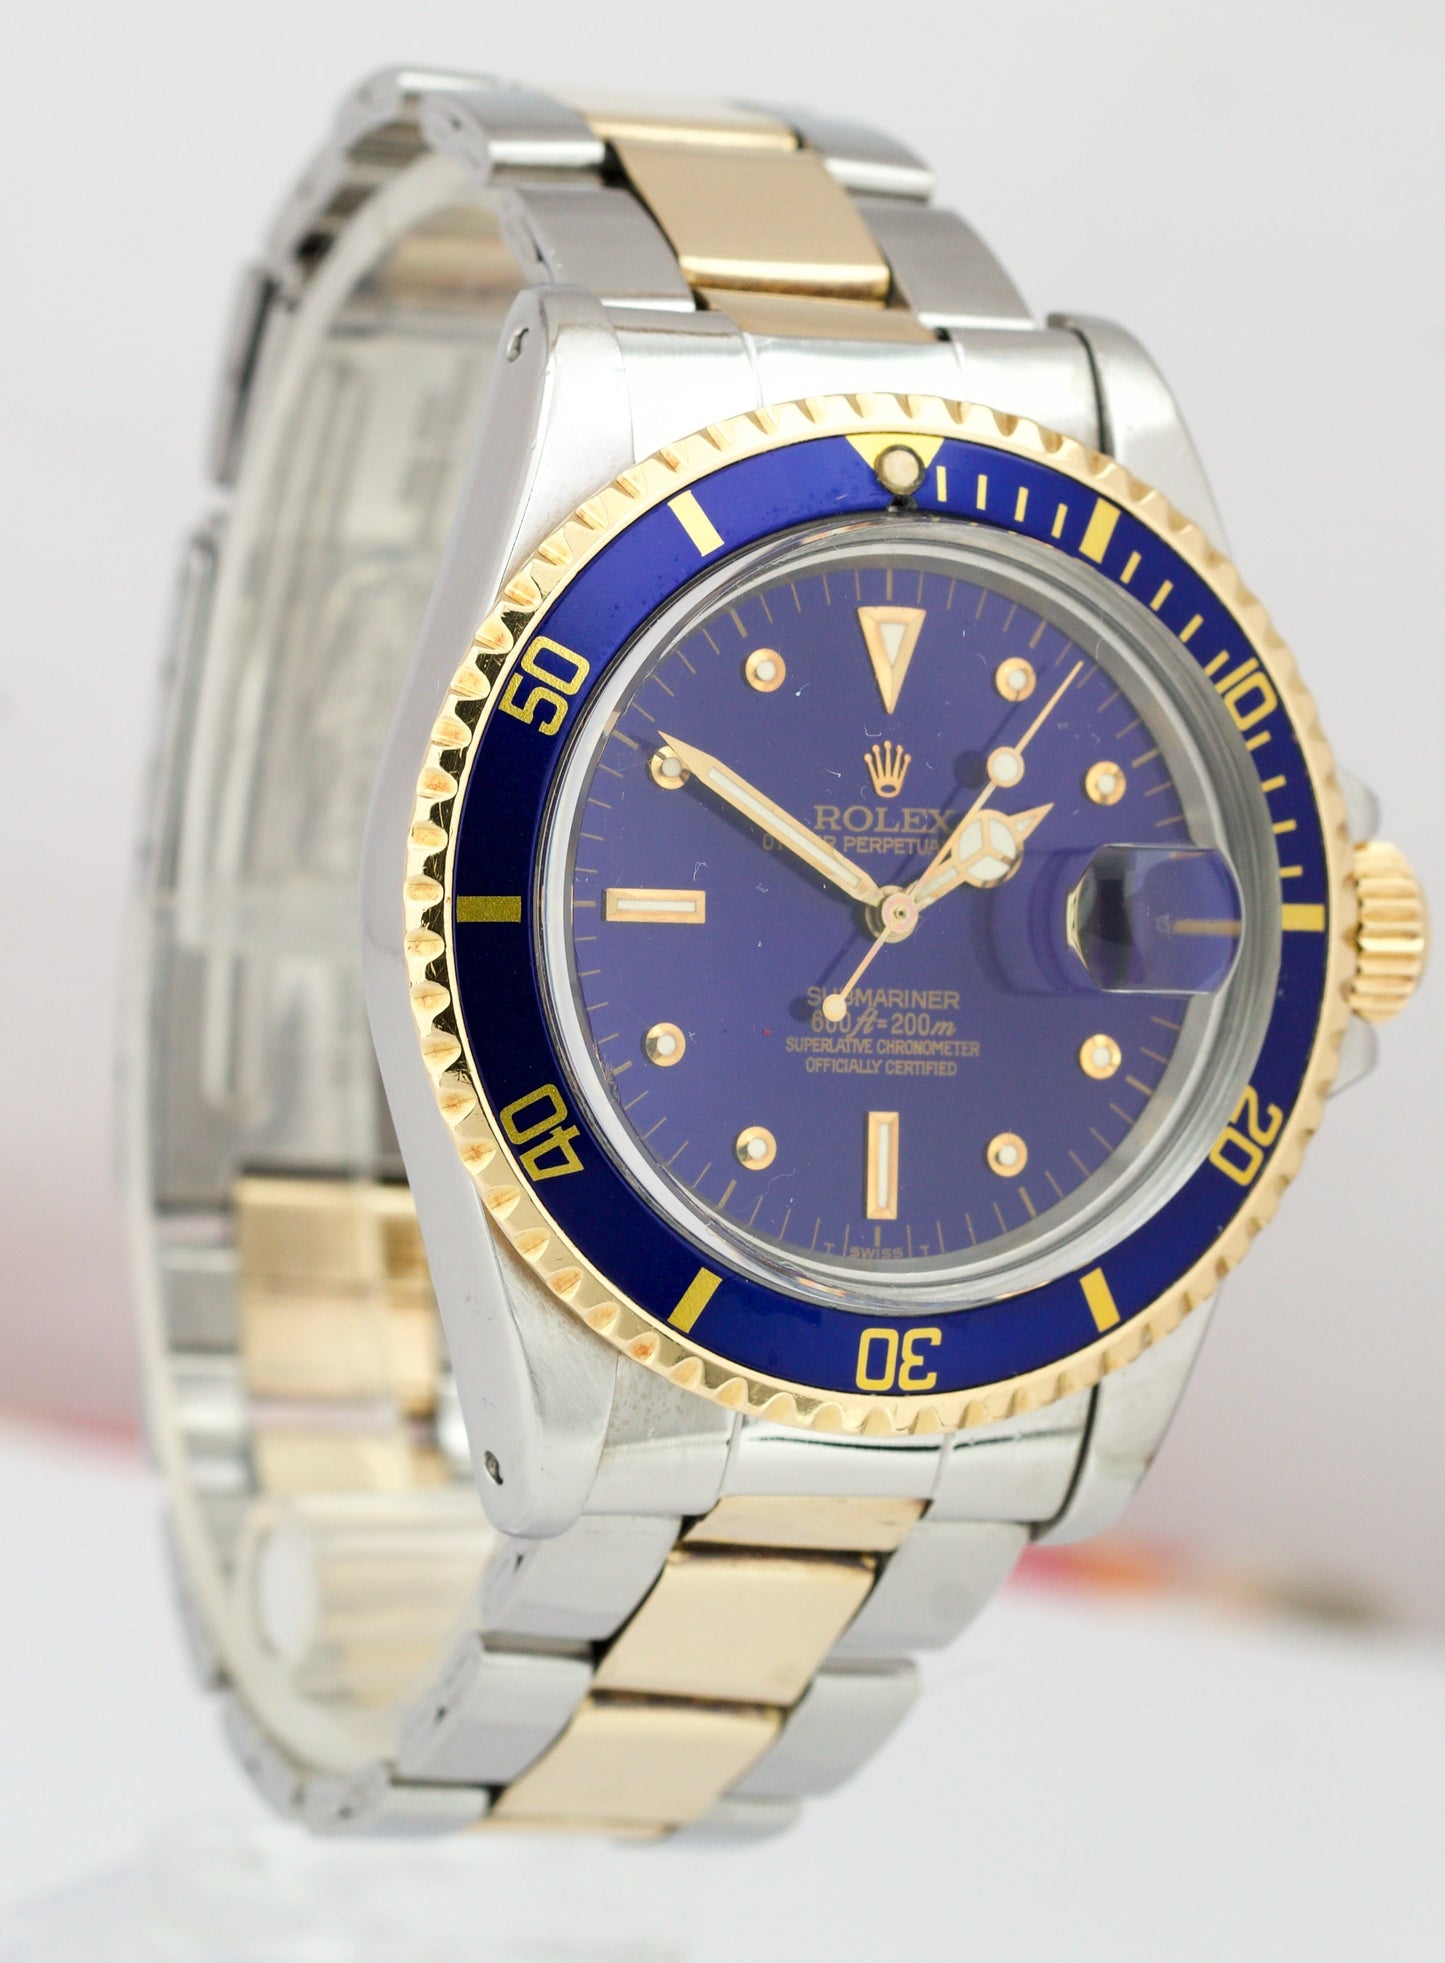 Vintage 1977 Rolex Submariner Date Nipple Two Tone Gold Blue 40mm Watch 1680